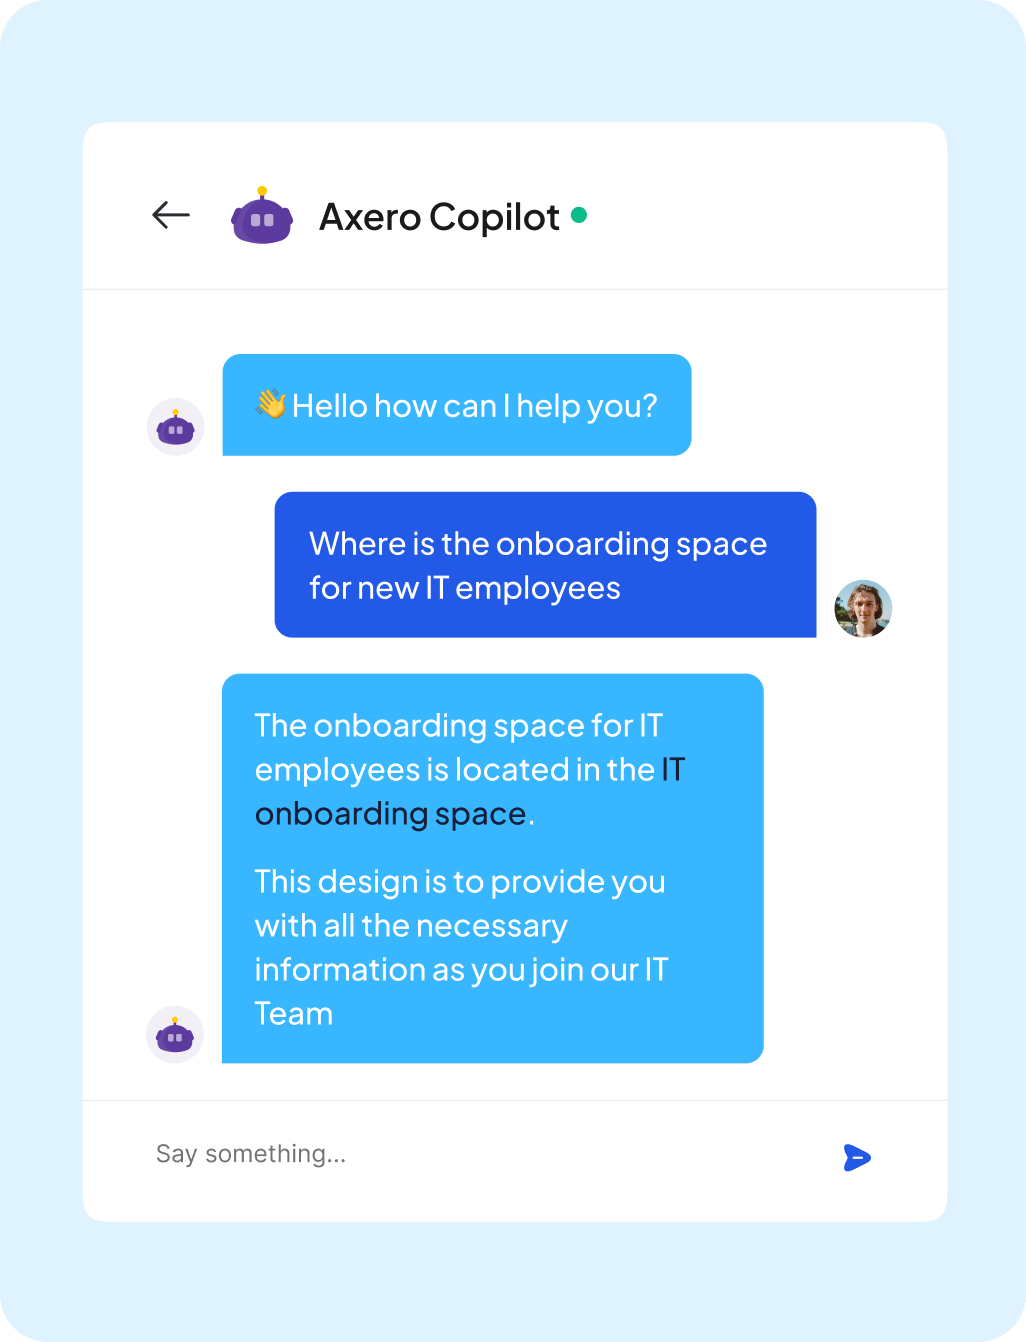 Screenshot of a chat interface with a user asking for the location of the onboarding space for it employees, and receiving a detailed response about the available designs and necessary information in the it onboarding area.